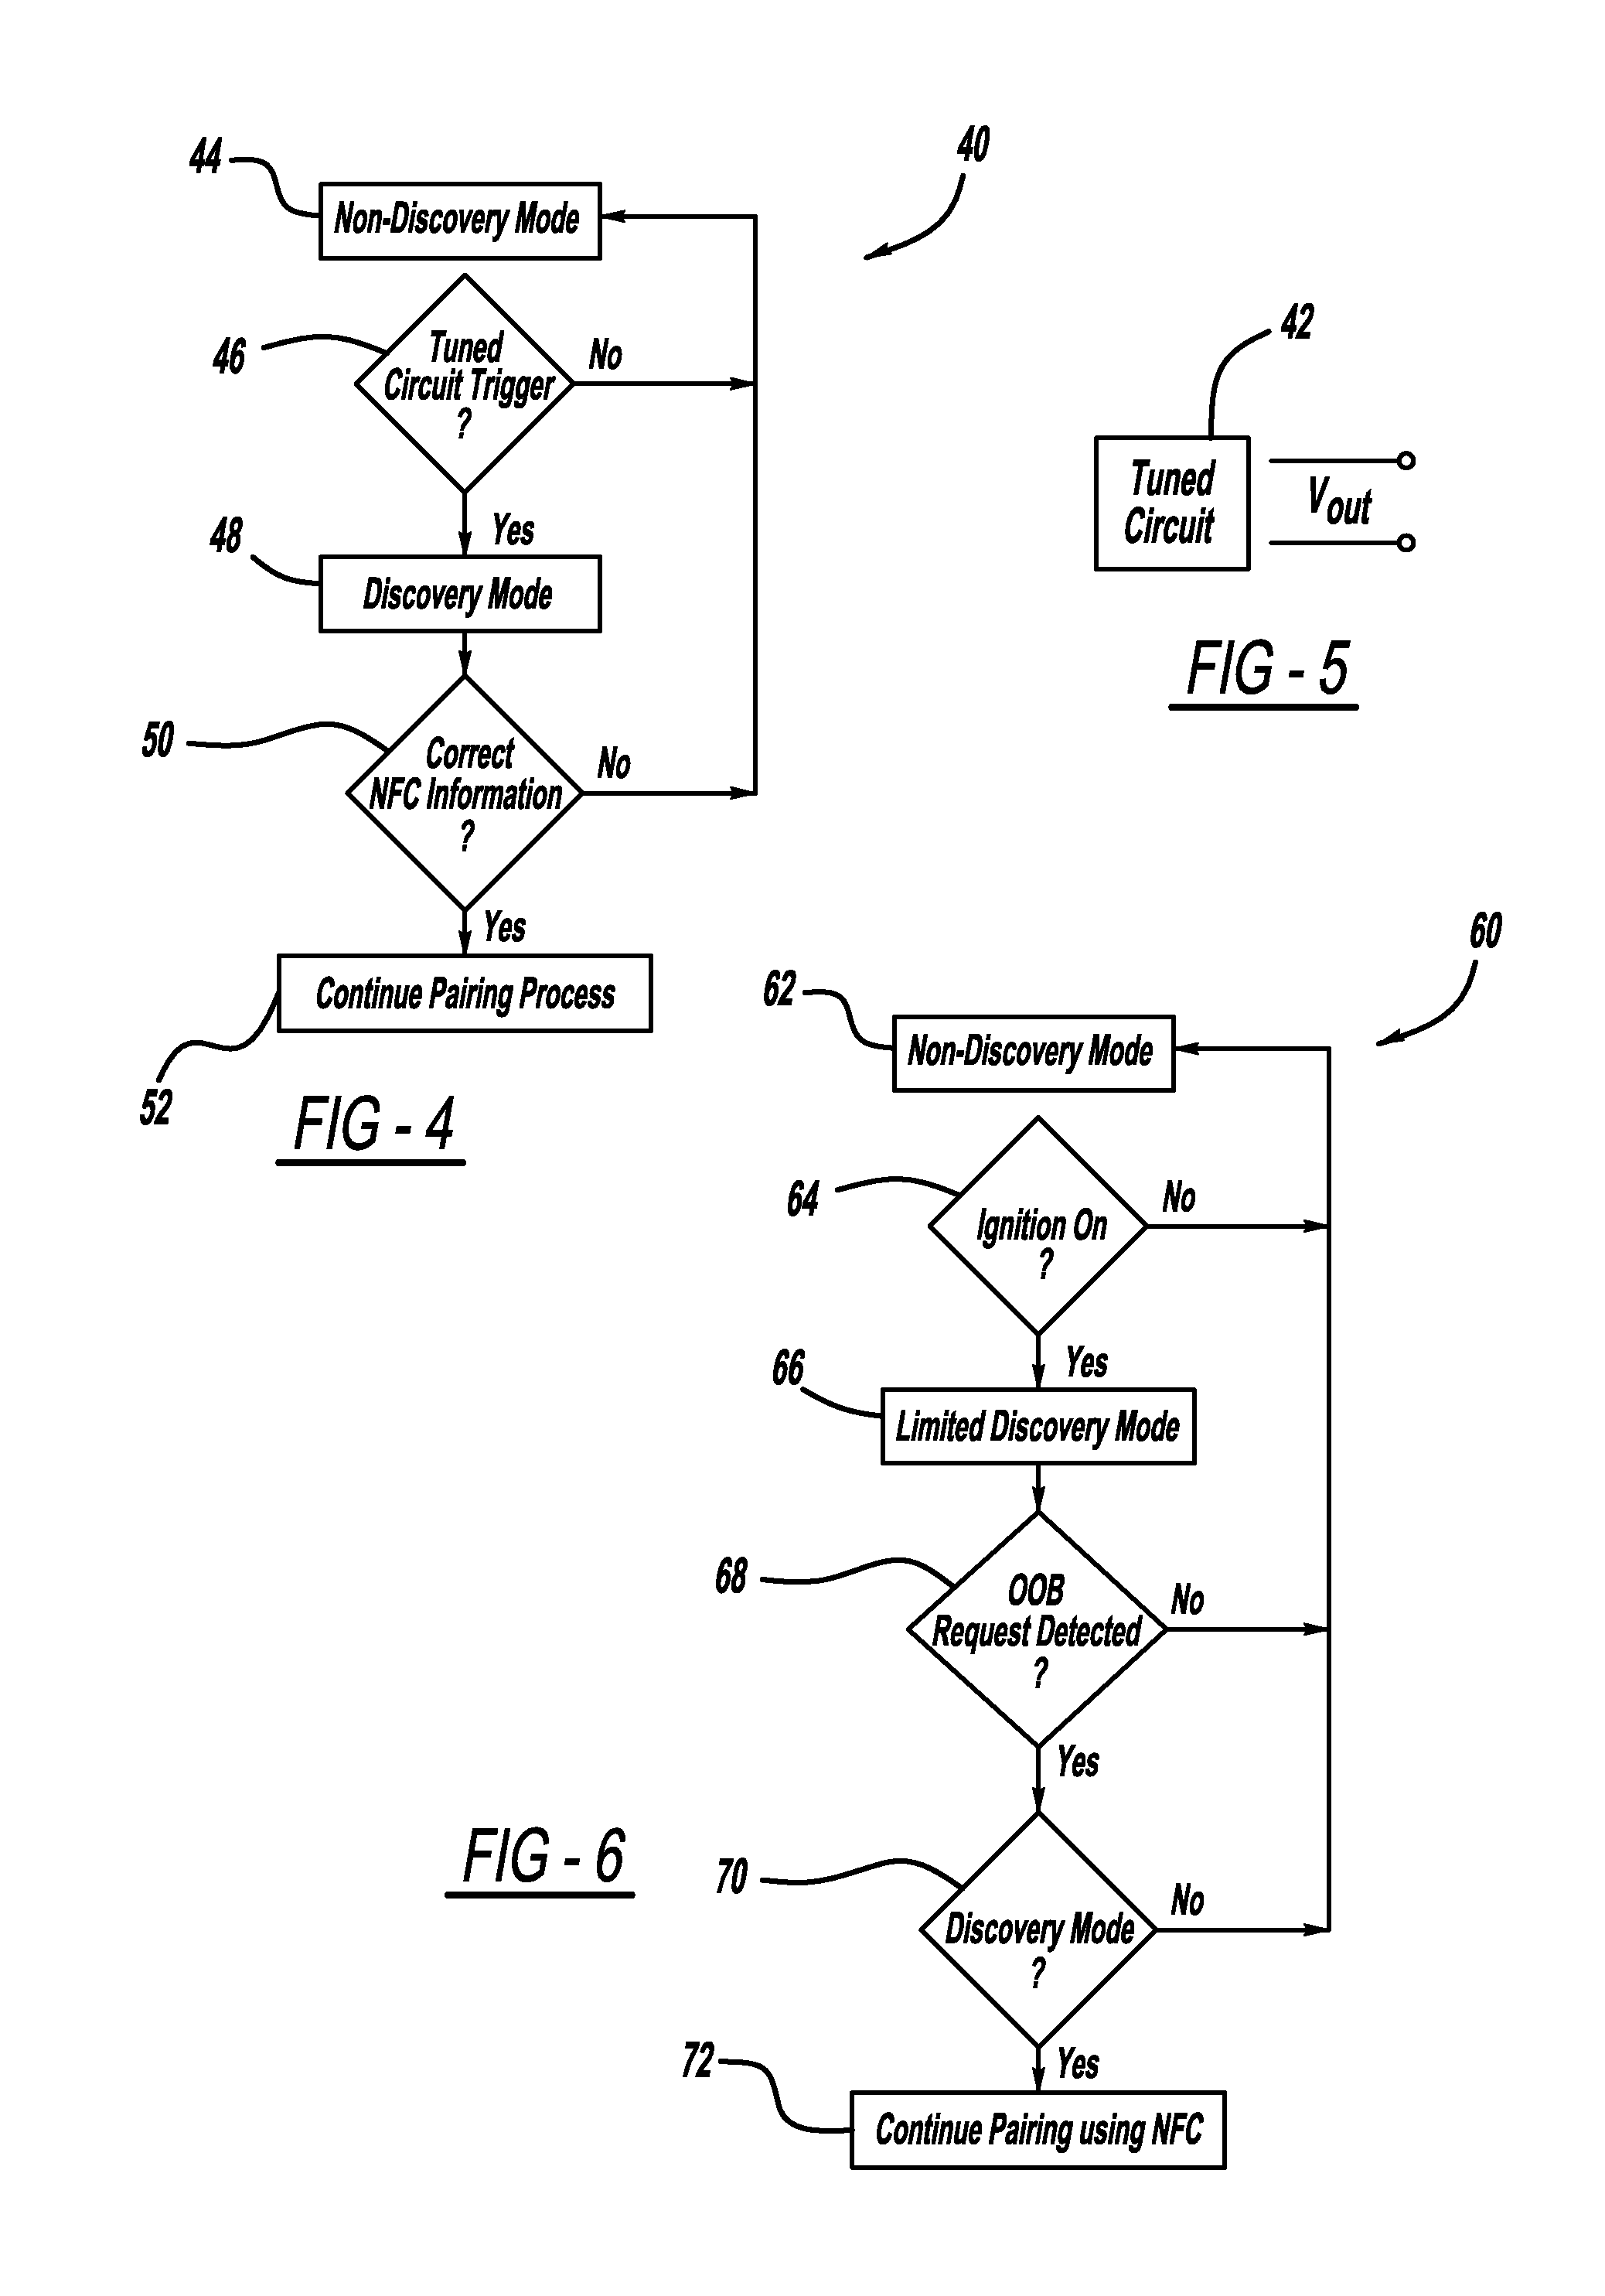 Multiple near field communication tags in a pairing domain